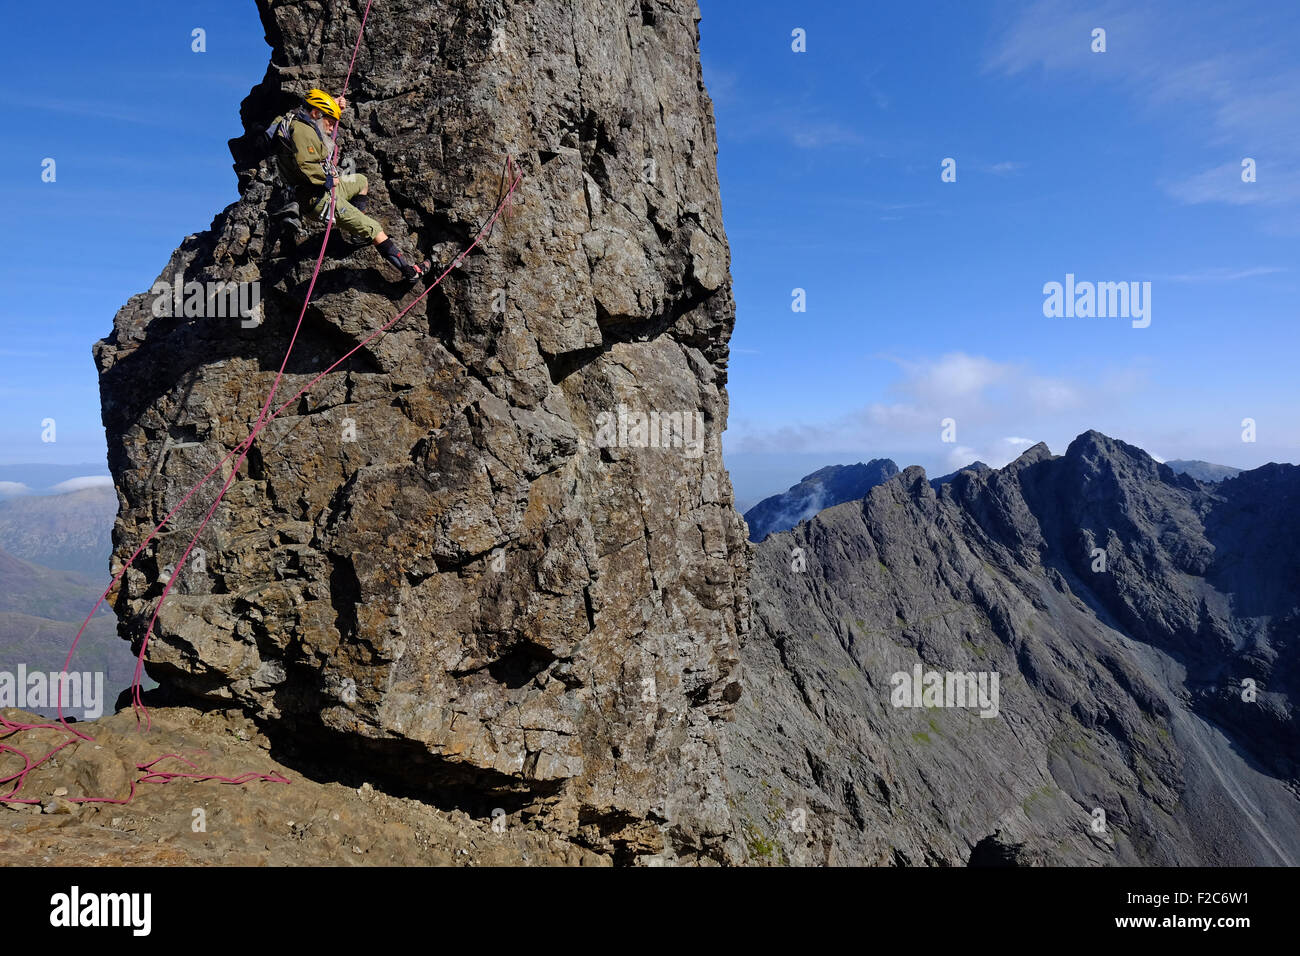 A climber abseiling down the The Inaccessible Pinnacle on the Cuillin Ridge, Skye, Scotland Stock Photo